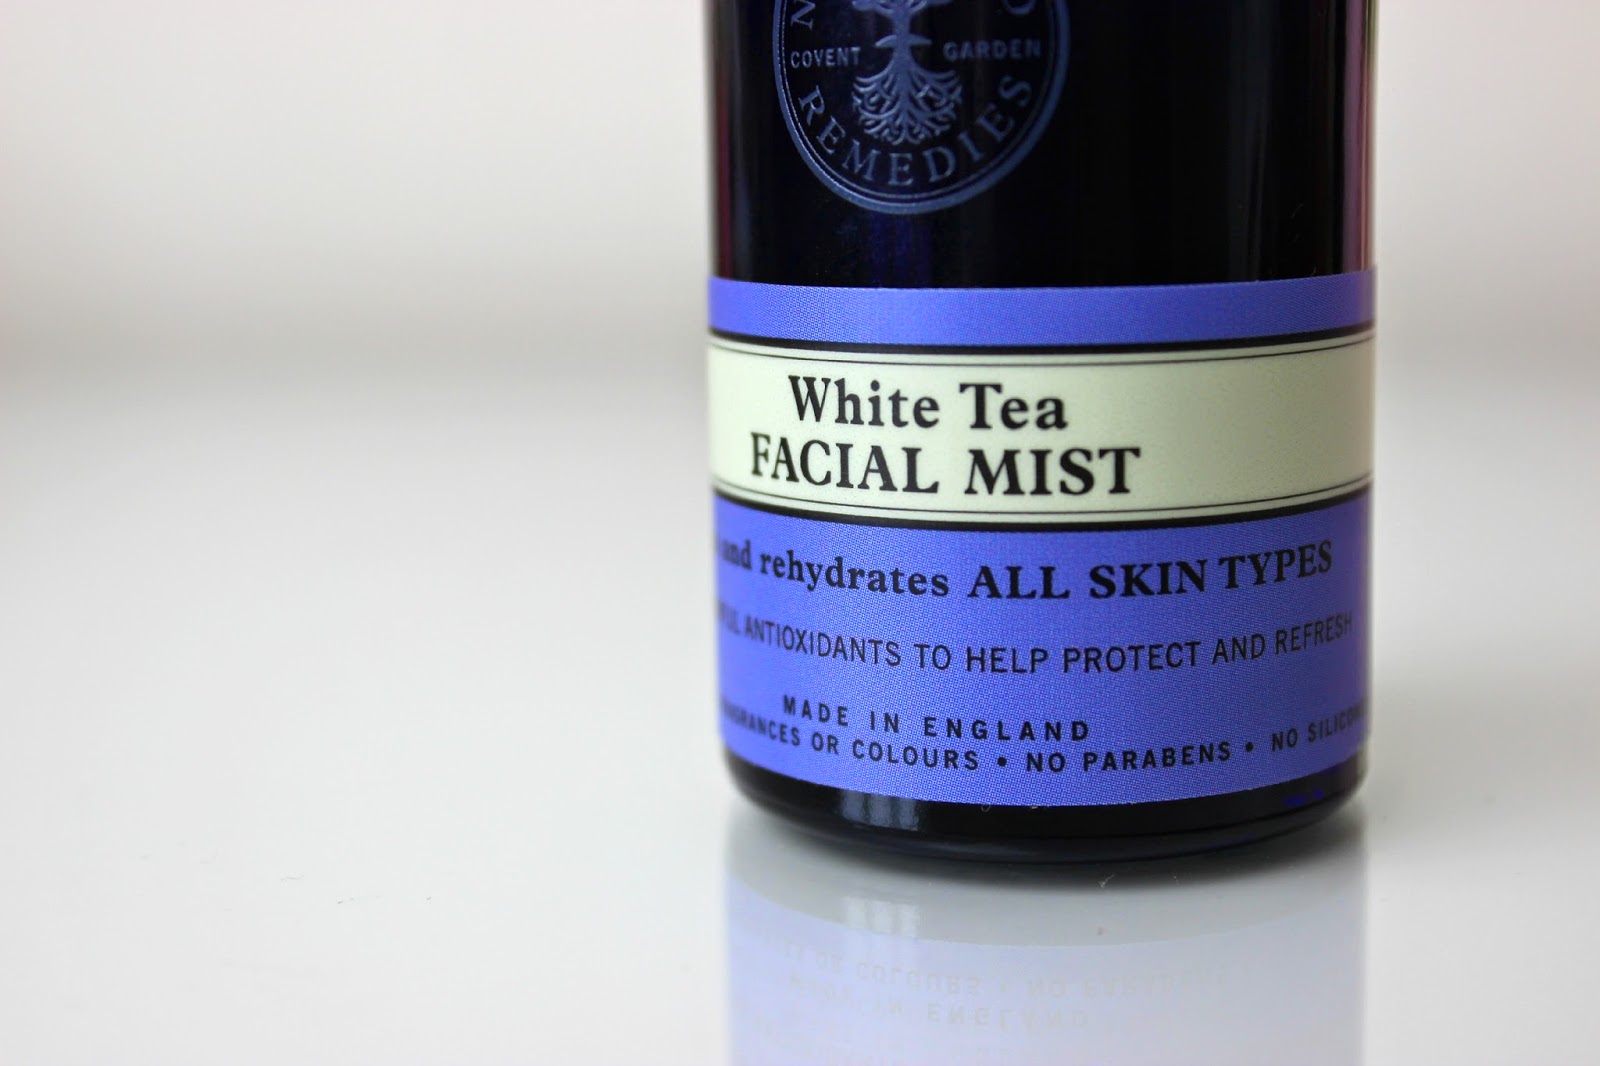 A picture of Neal's Yard Remedies White Tea Facial Mist